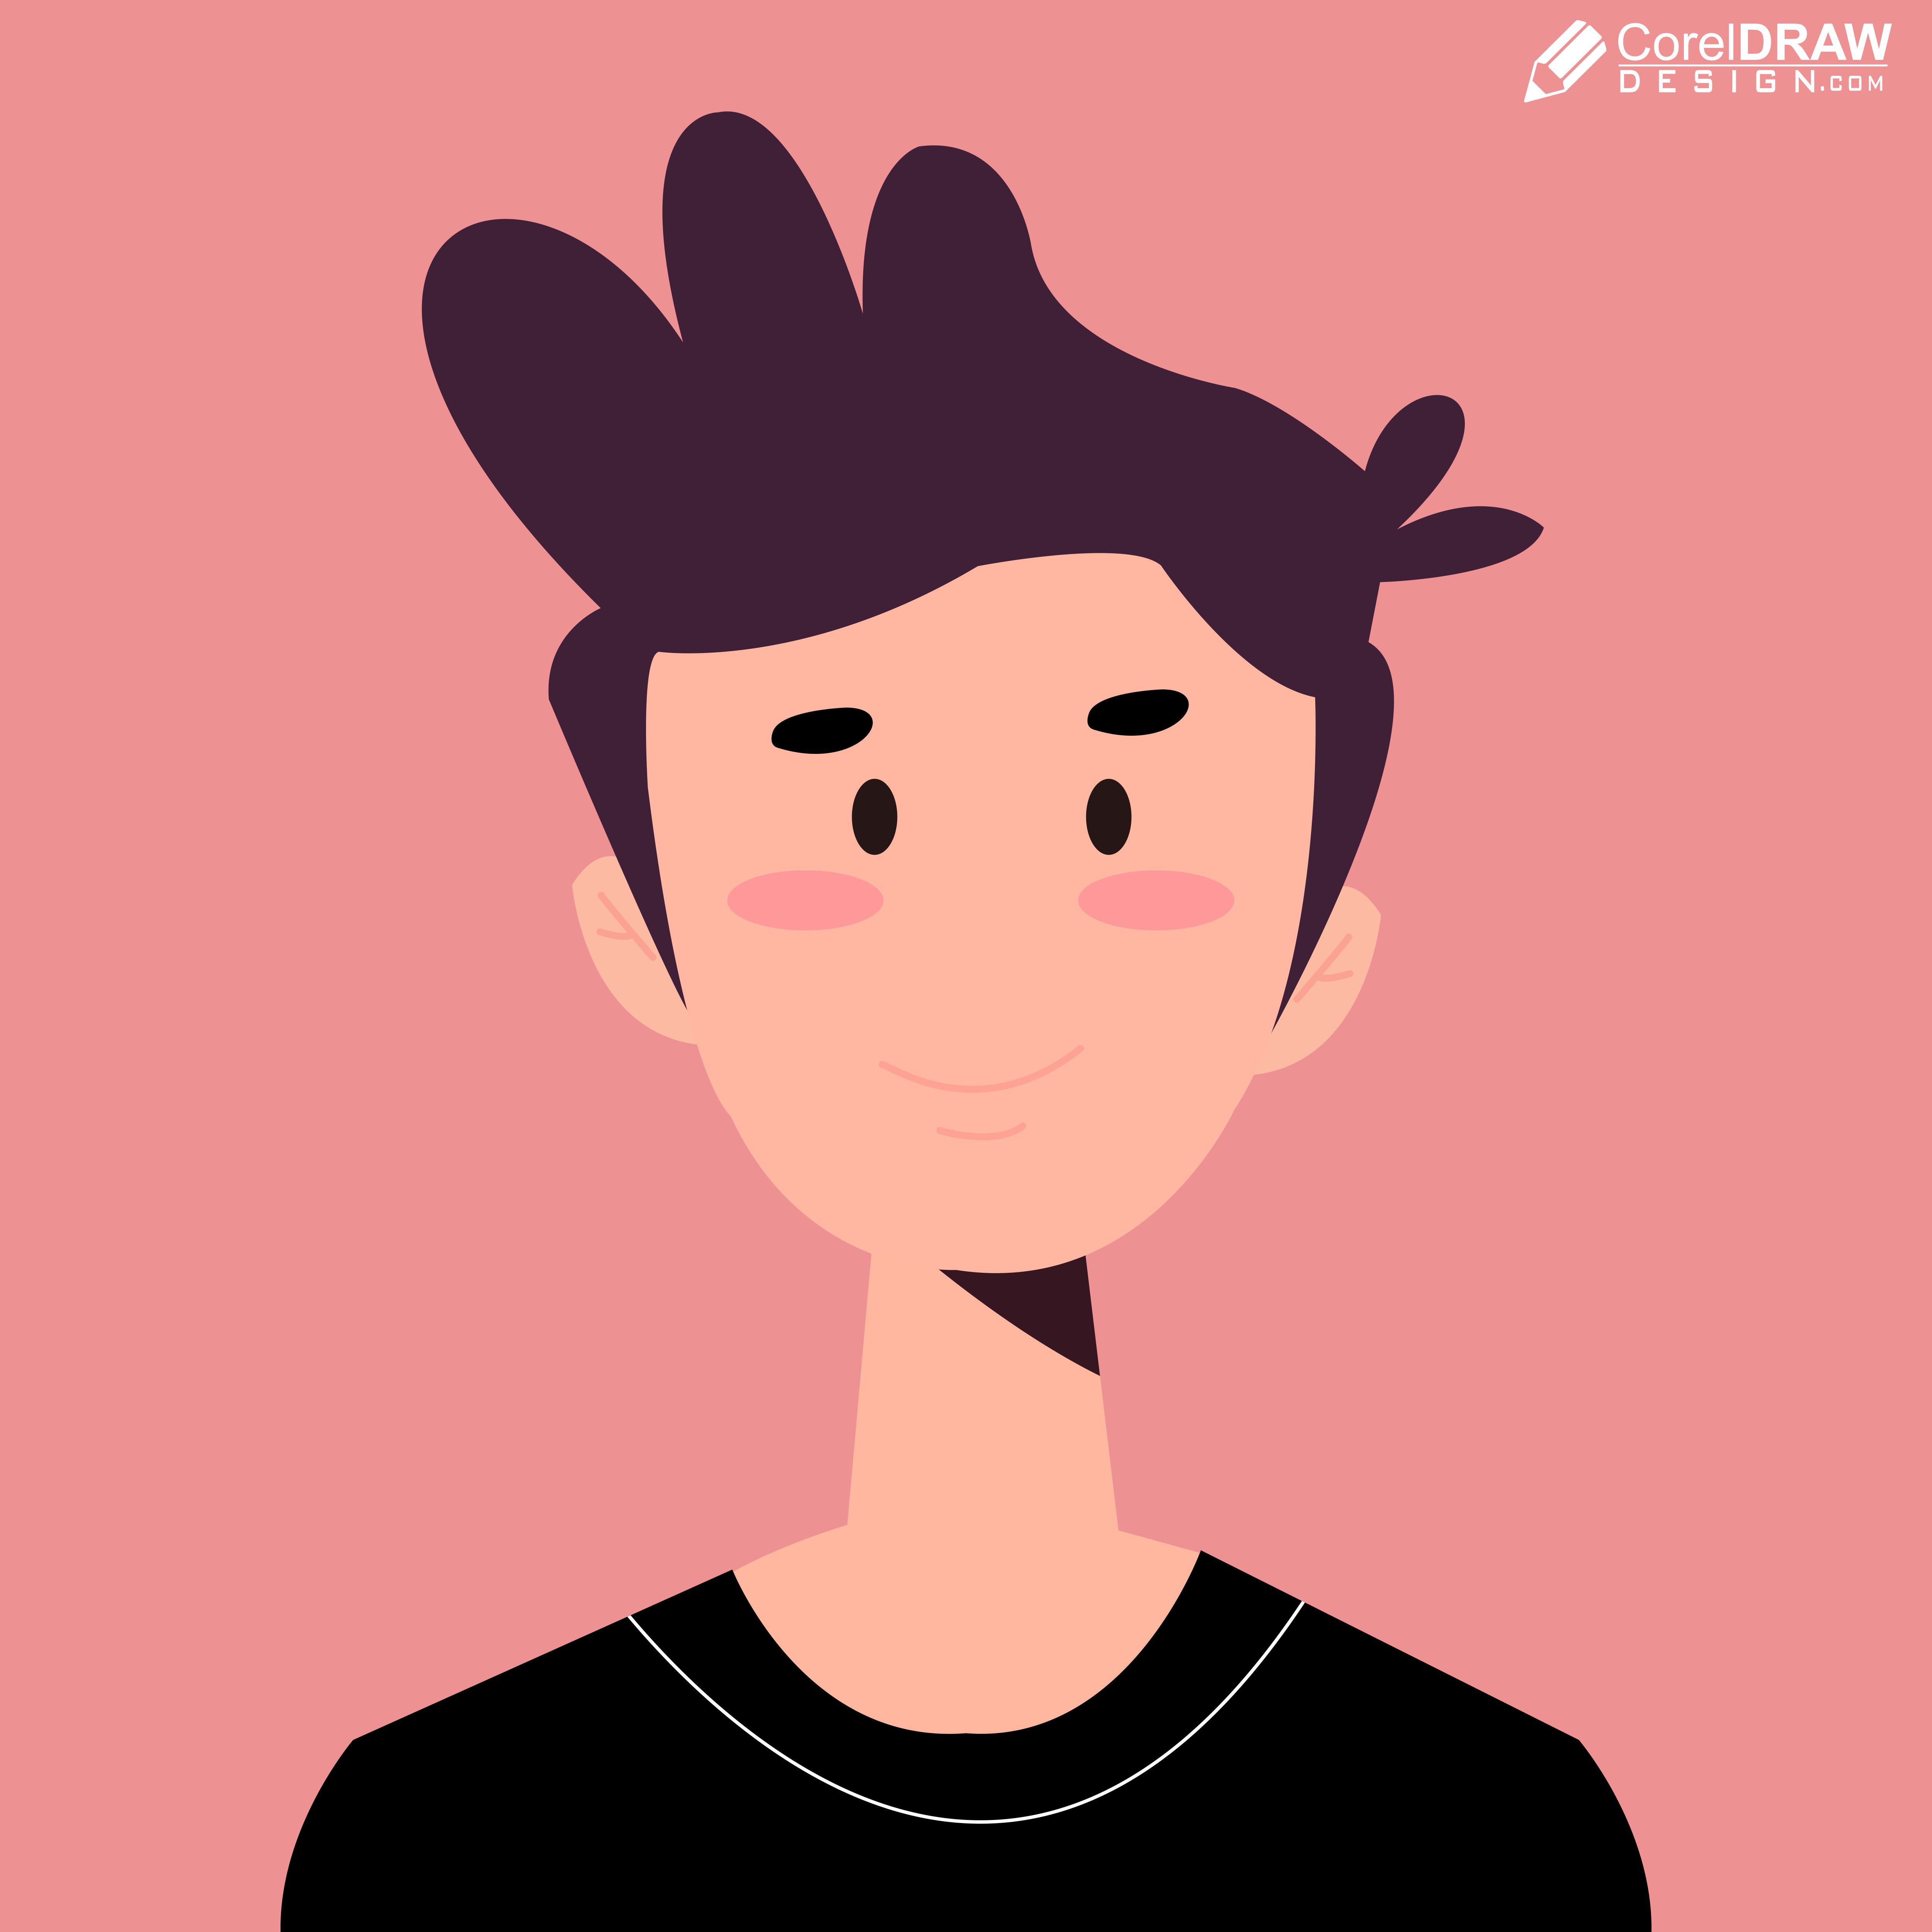 Young smiling boy character vector design